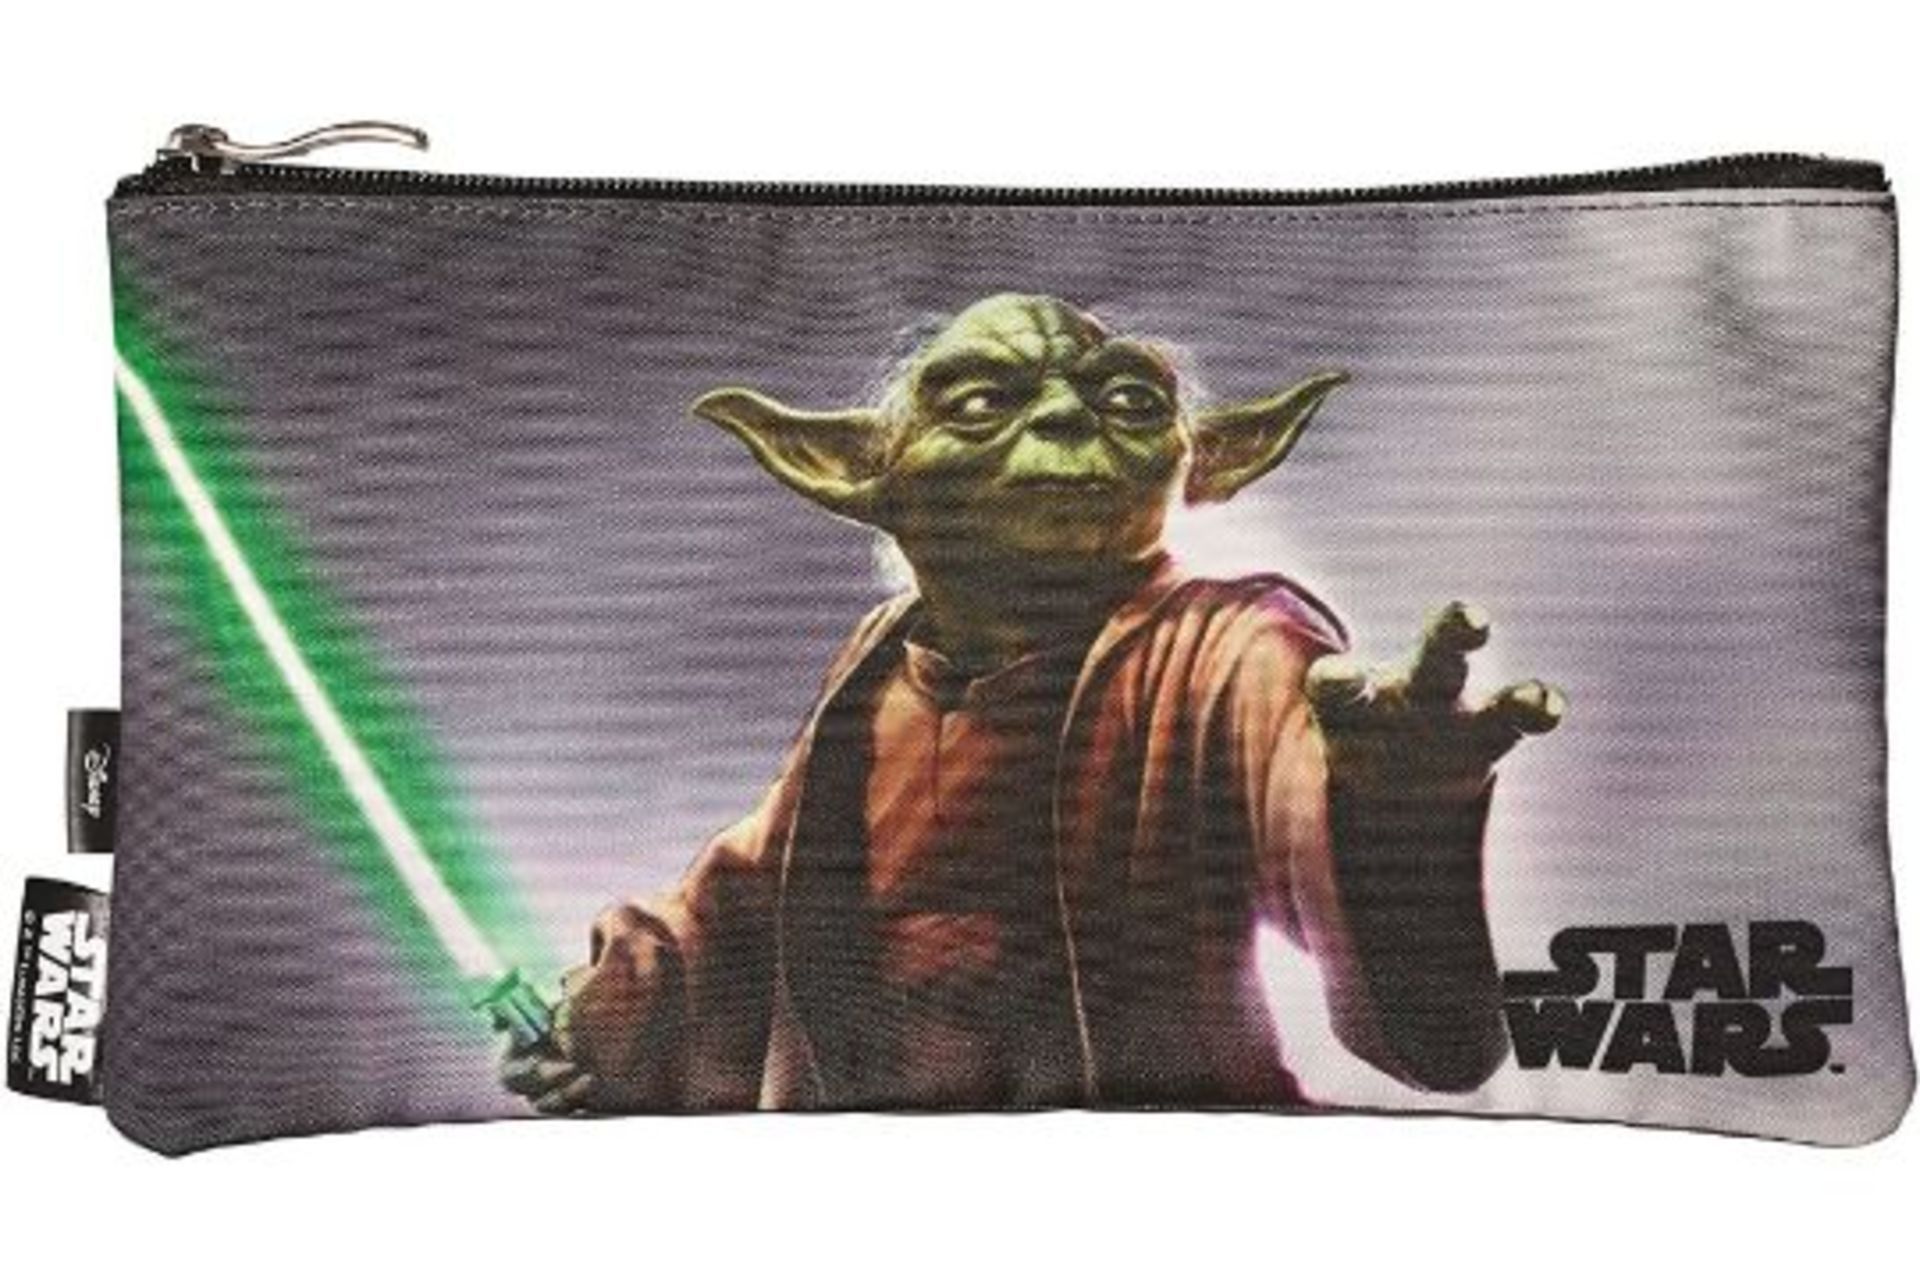 BRAND NEW STAR WARS™ YODA CARRY-ALL POUCH PENCIL CASE